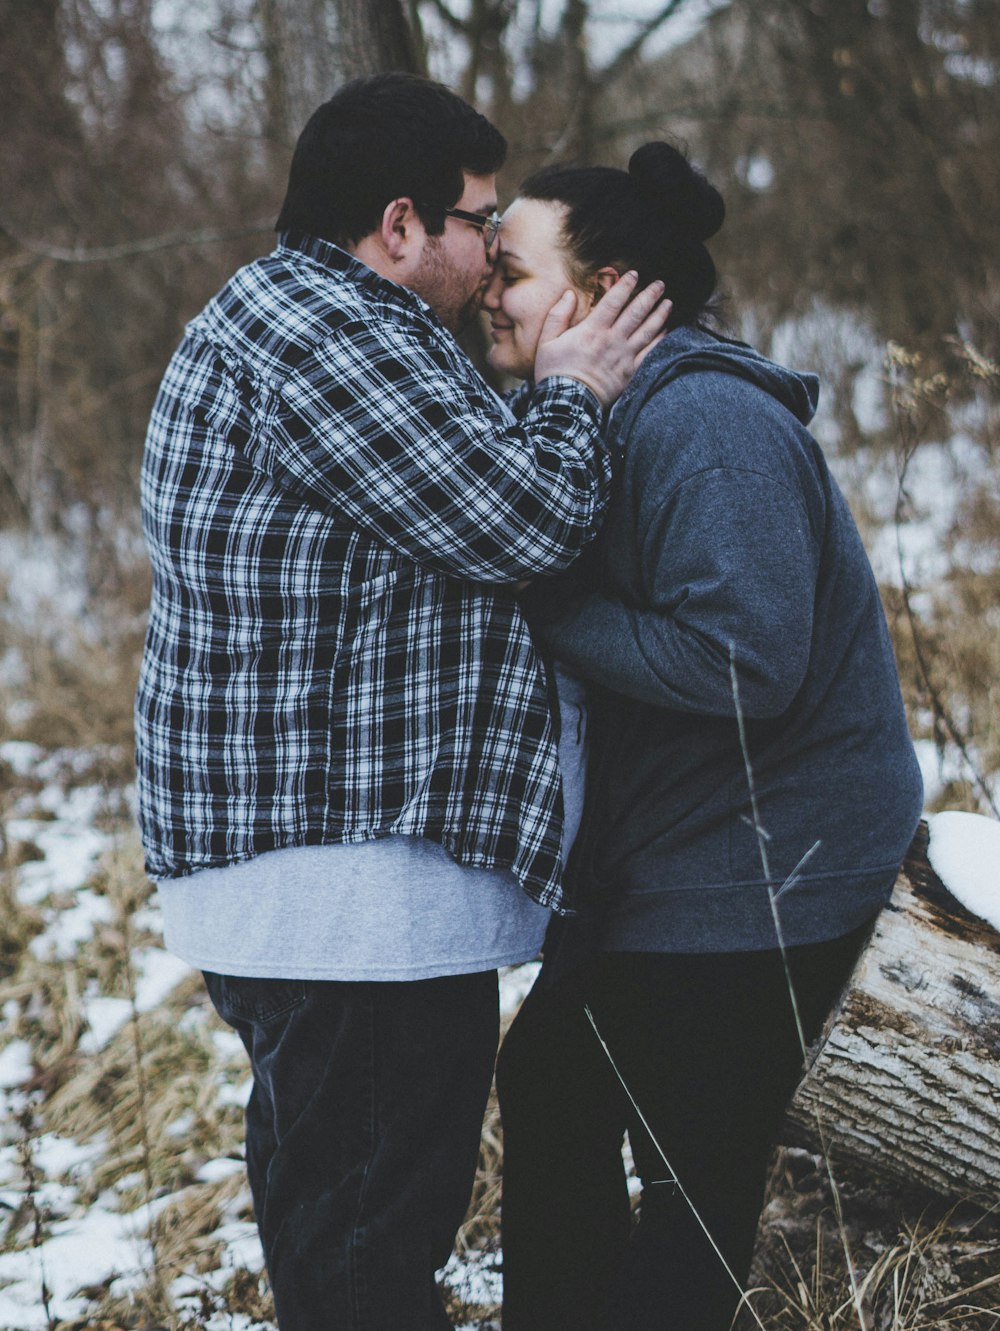 500 Couple Kissing Pictures Hd Download Free Images On Unsplash